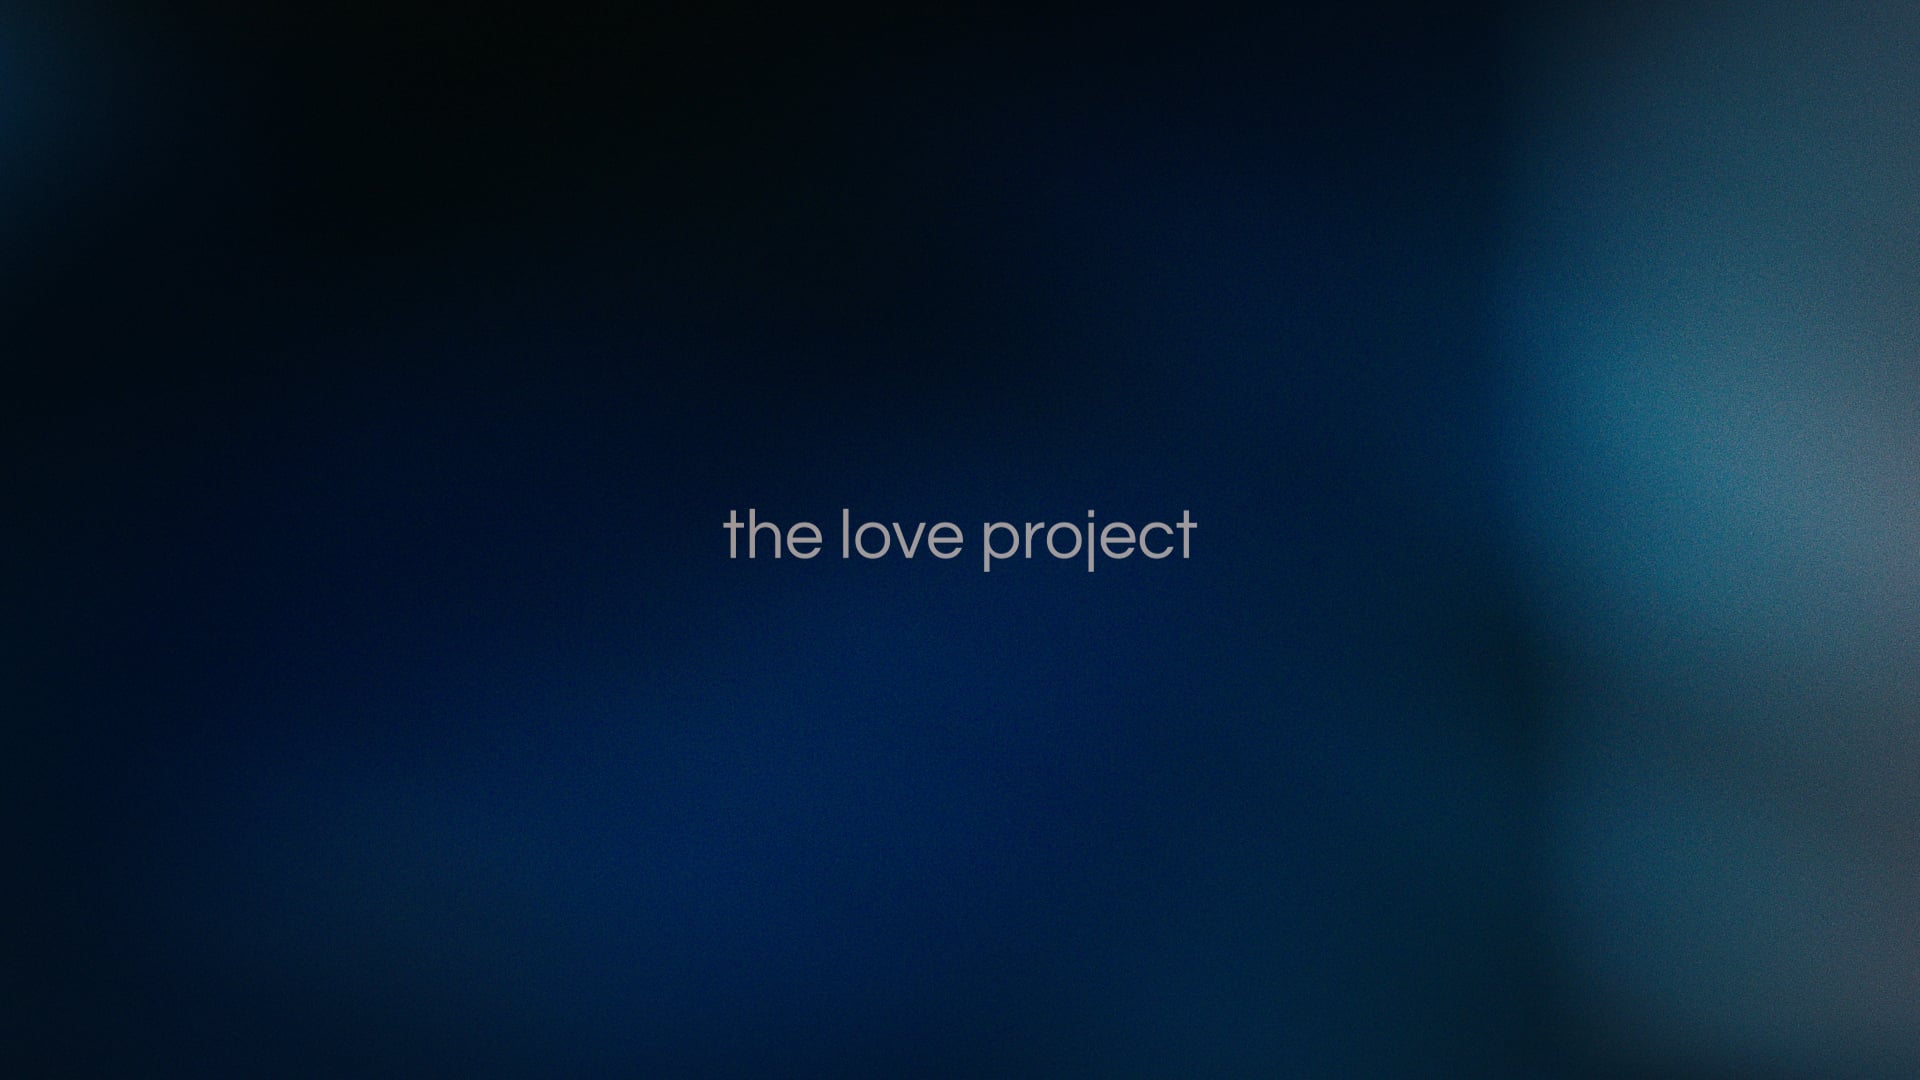 THE LOVE PROJECT